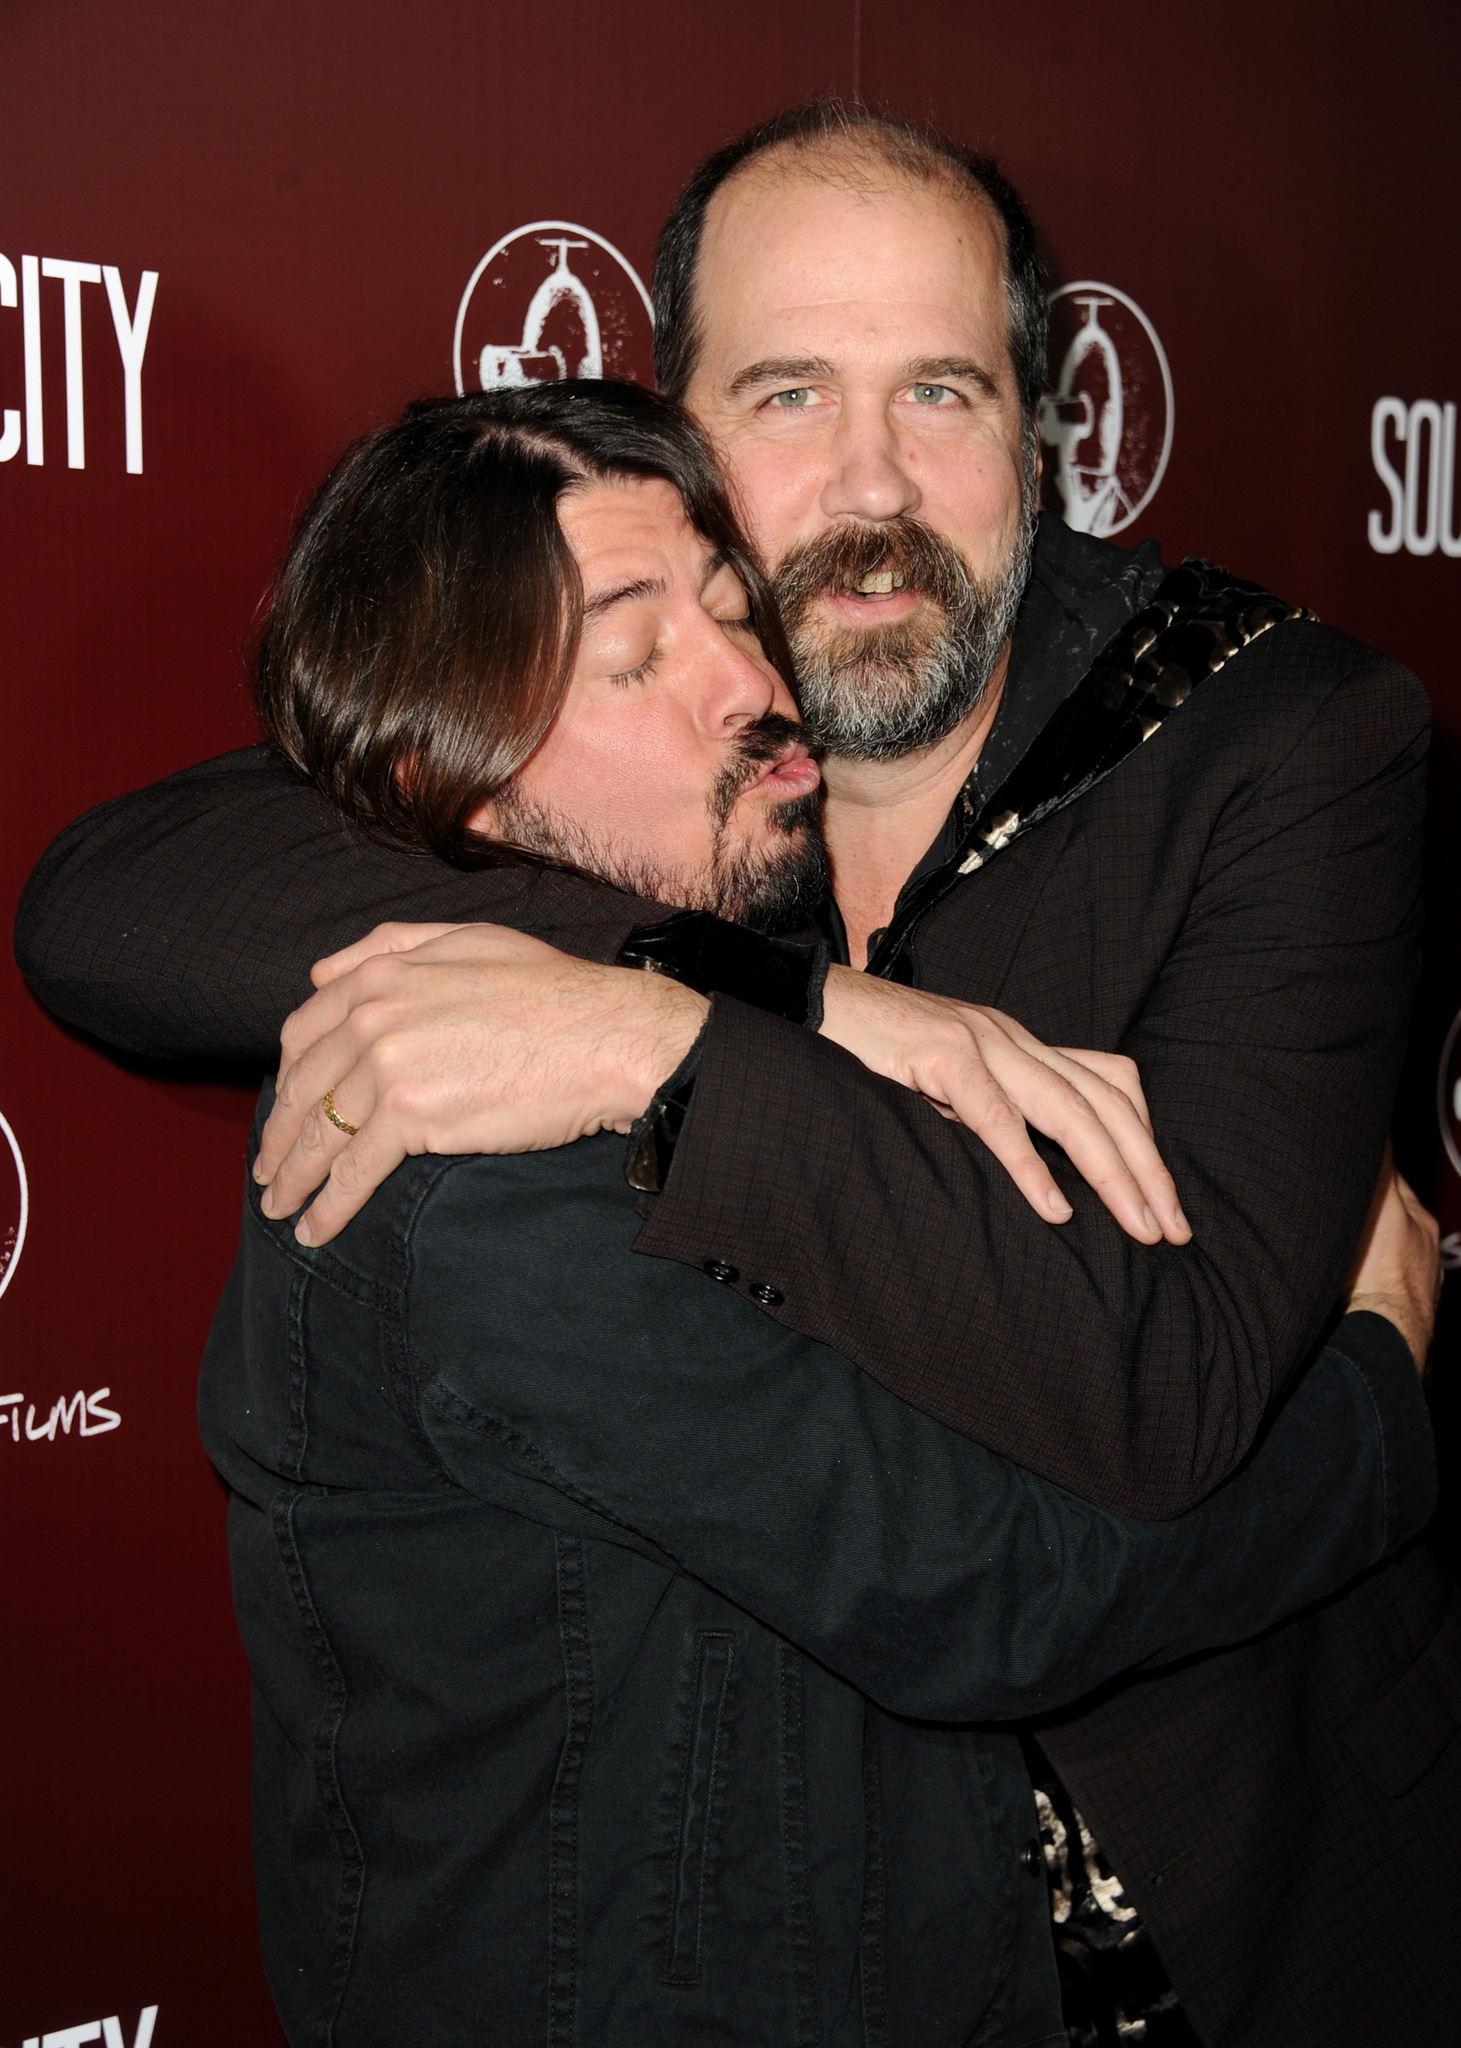 Dave Grohl and Krist Novoselic arrive at the premiere of 